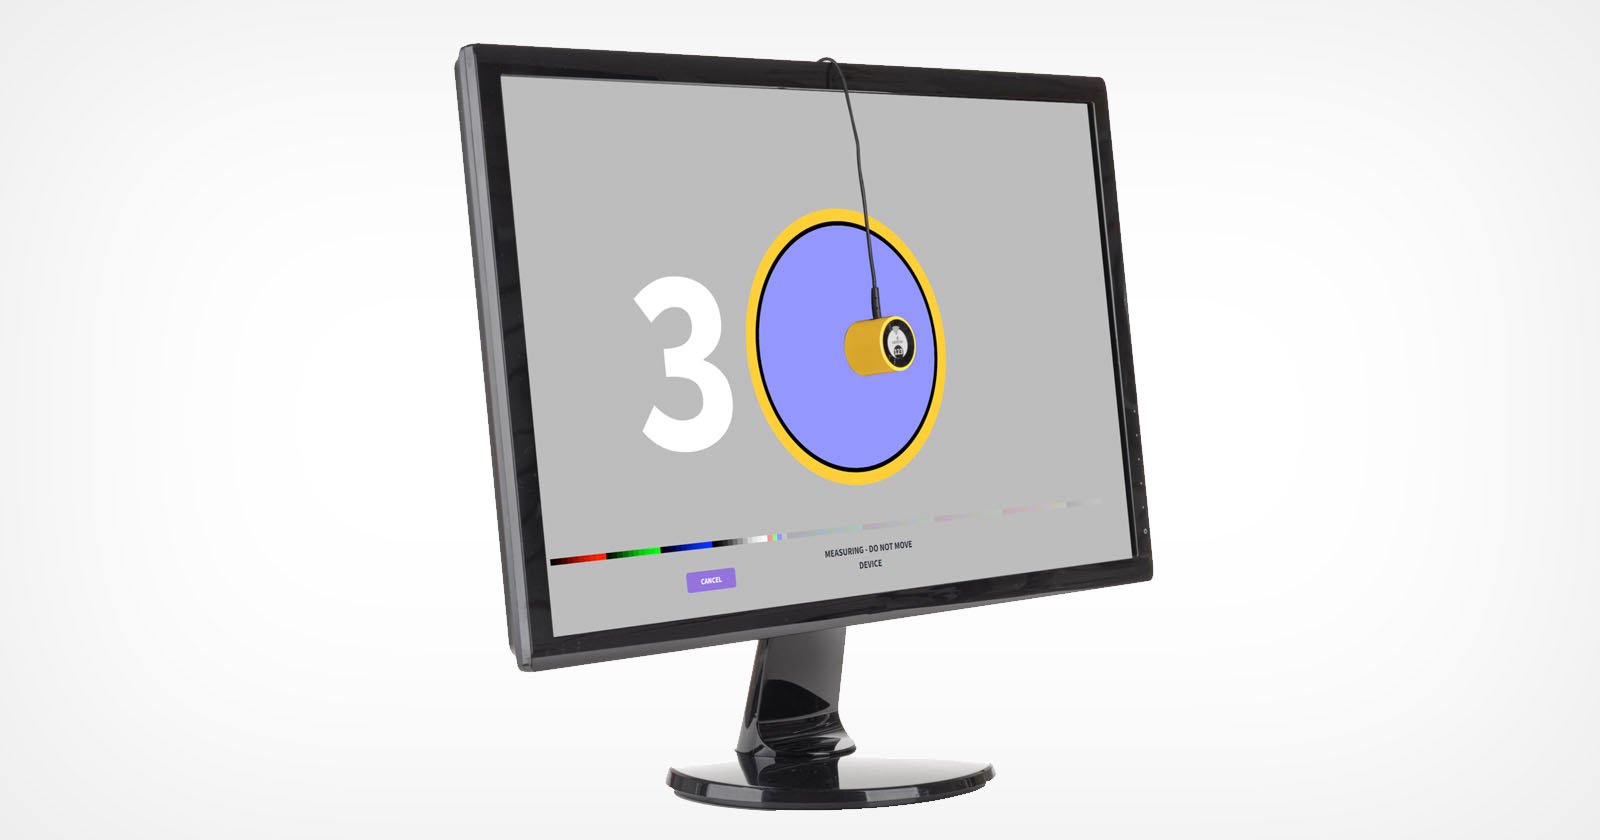 The Calibrite Display 123 is a Super-Simple Monitor Calibrator for Anyone